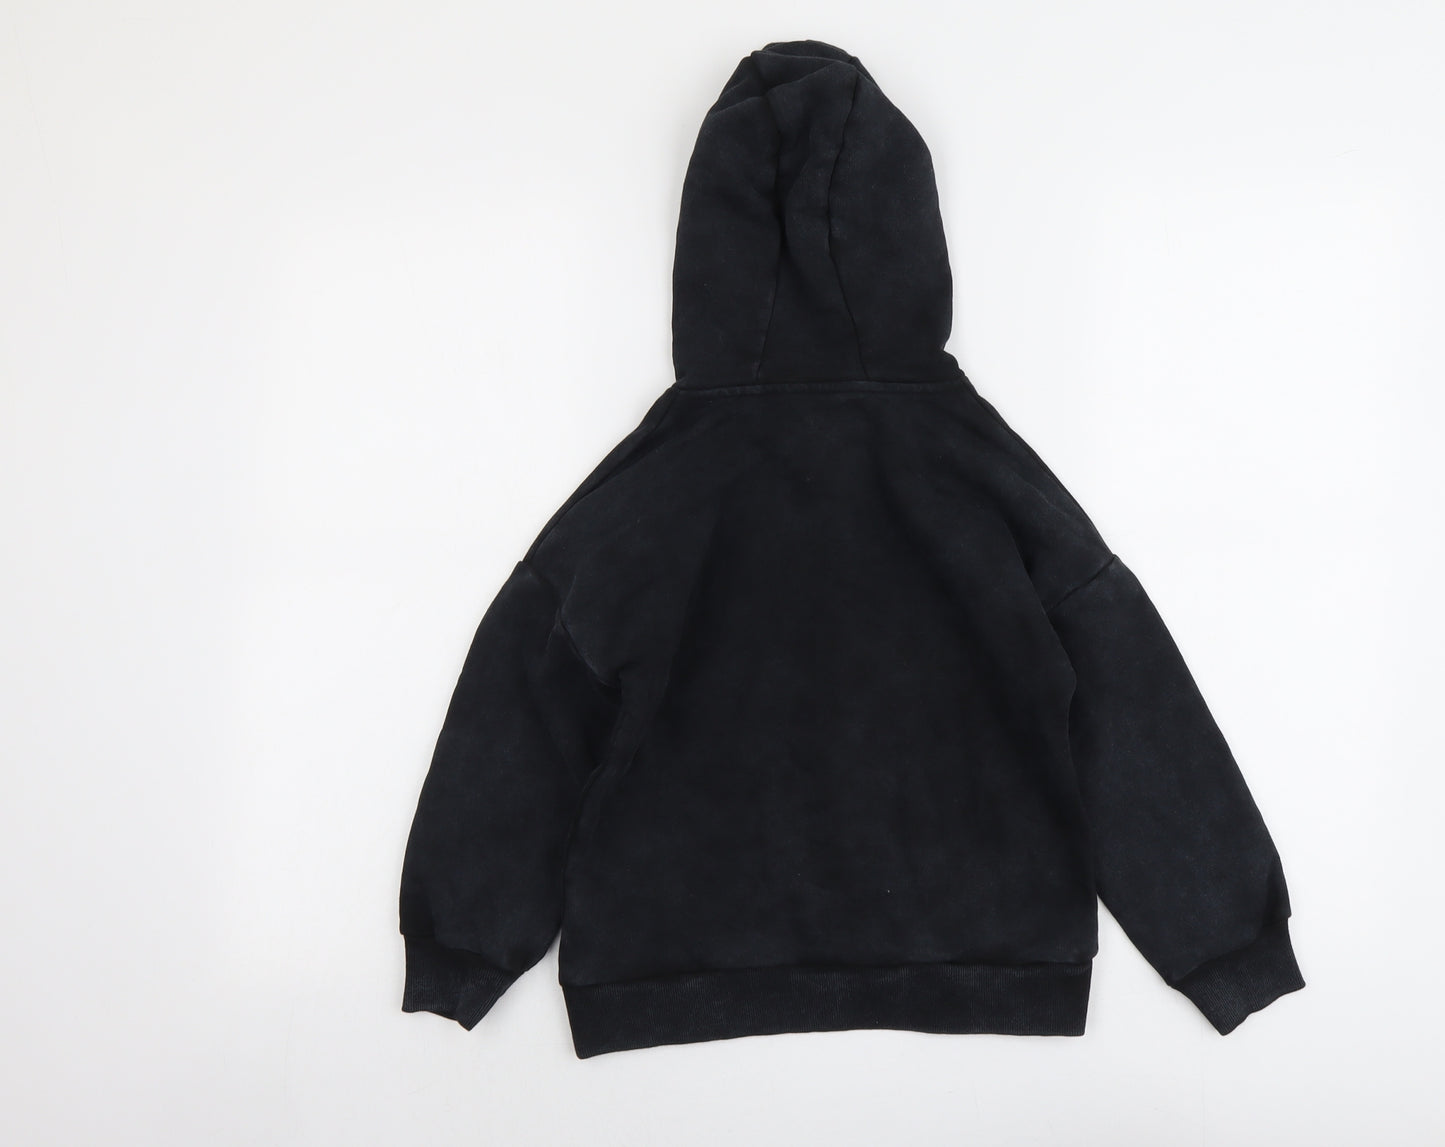 Marks and Spencer Boys Black Cotton Pullover Hoodie Size 7-8 Years Pullover - Strangers Things